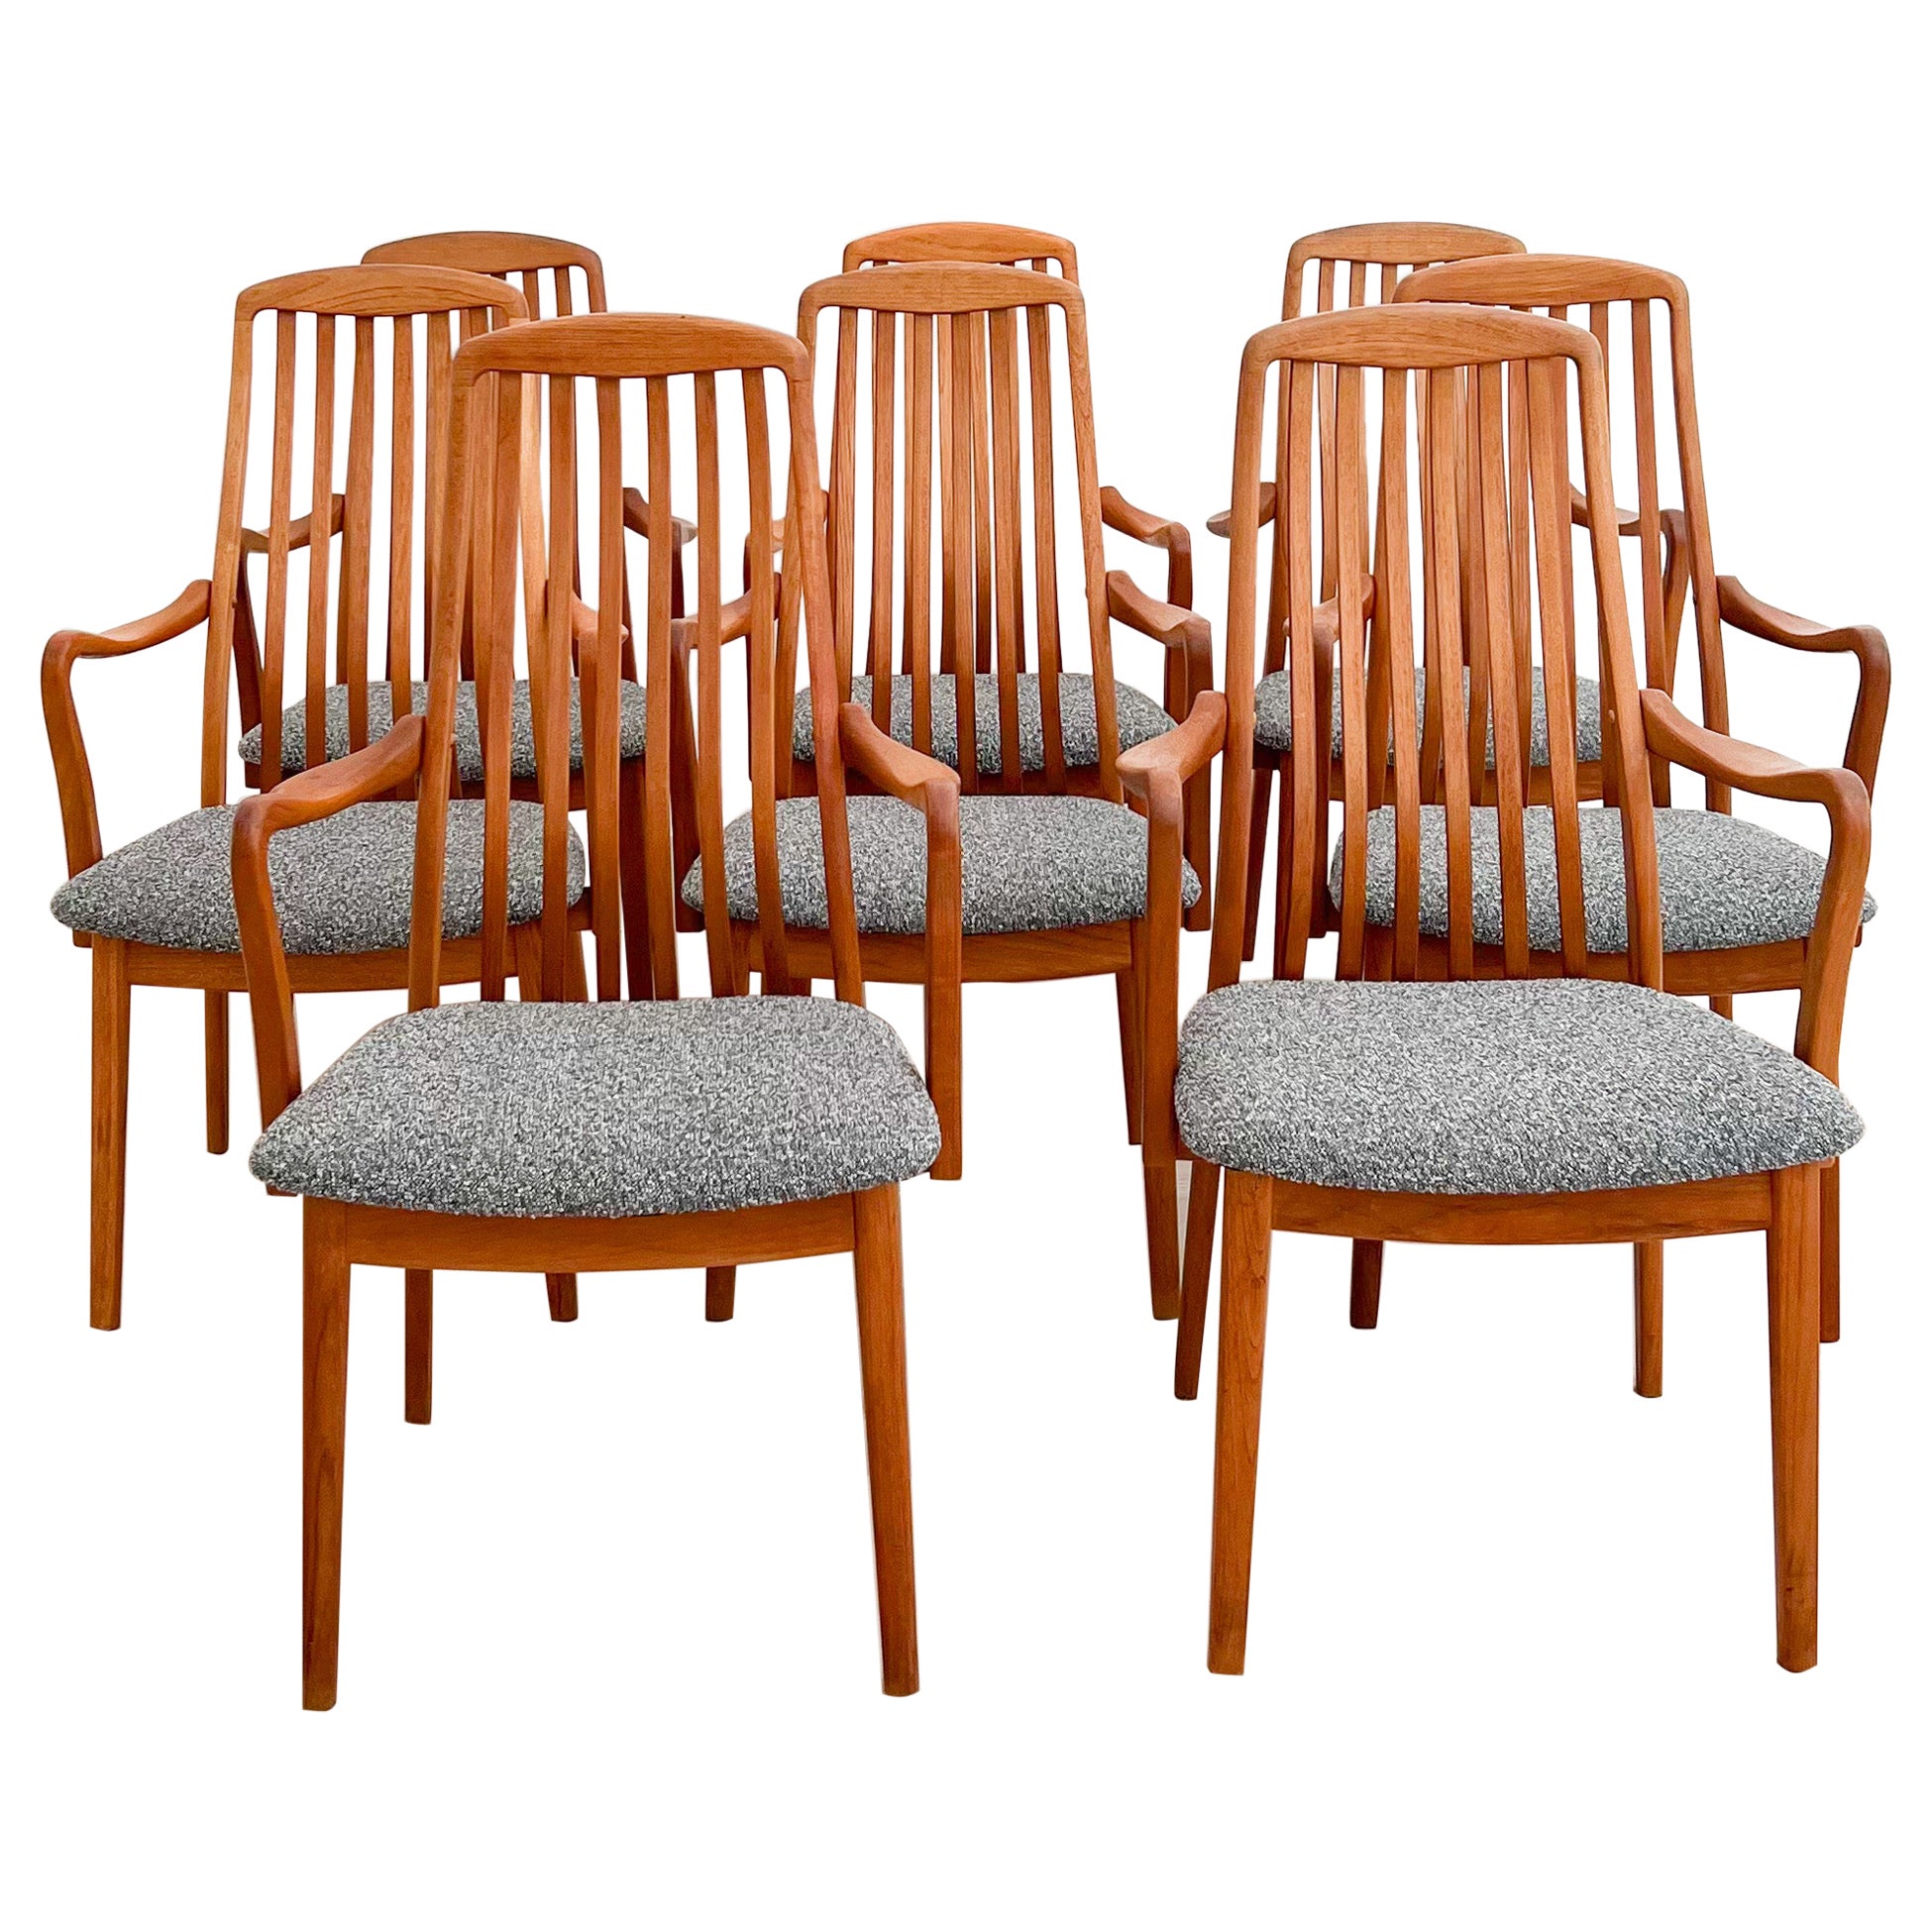 Set of 8 Danish Teak Dining Chairs with New Upholstery by Virsidan A/S